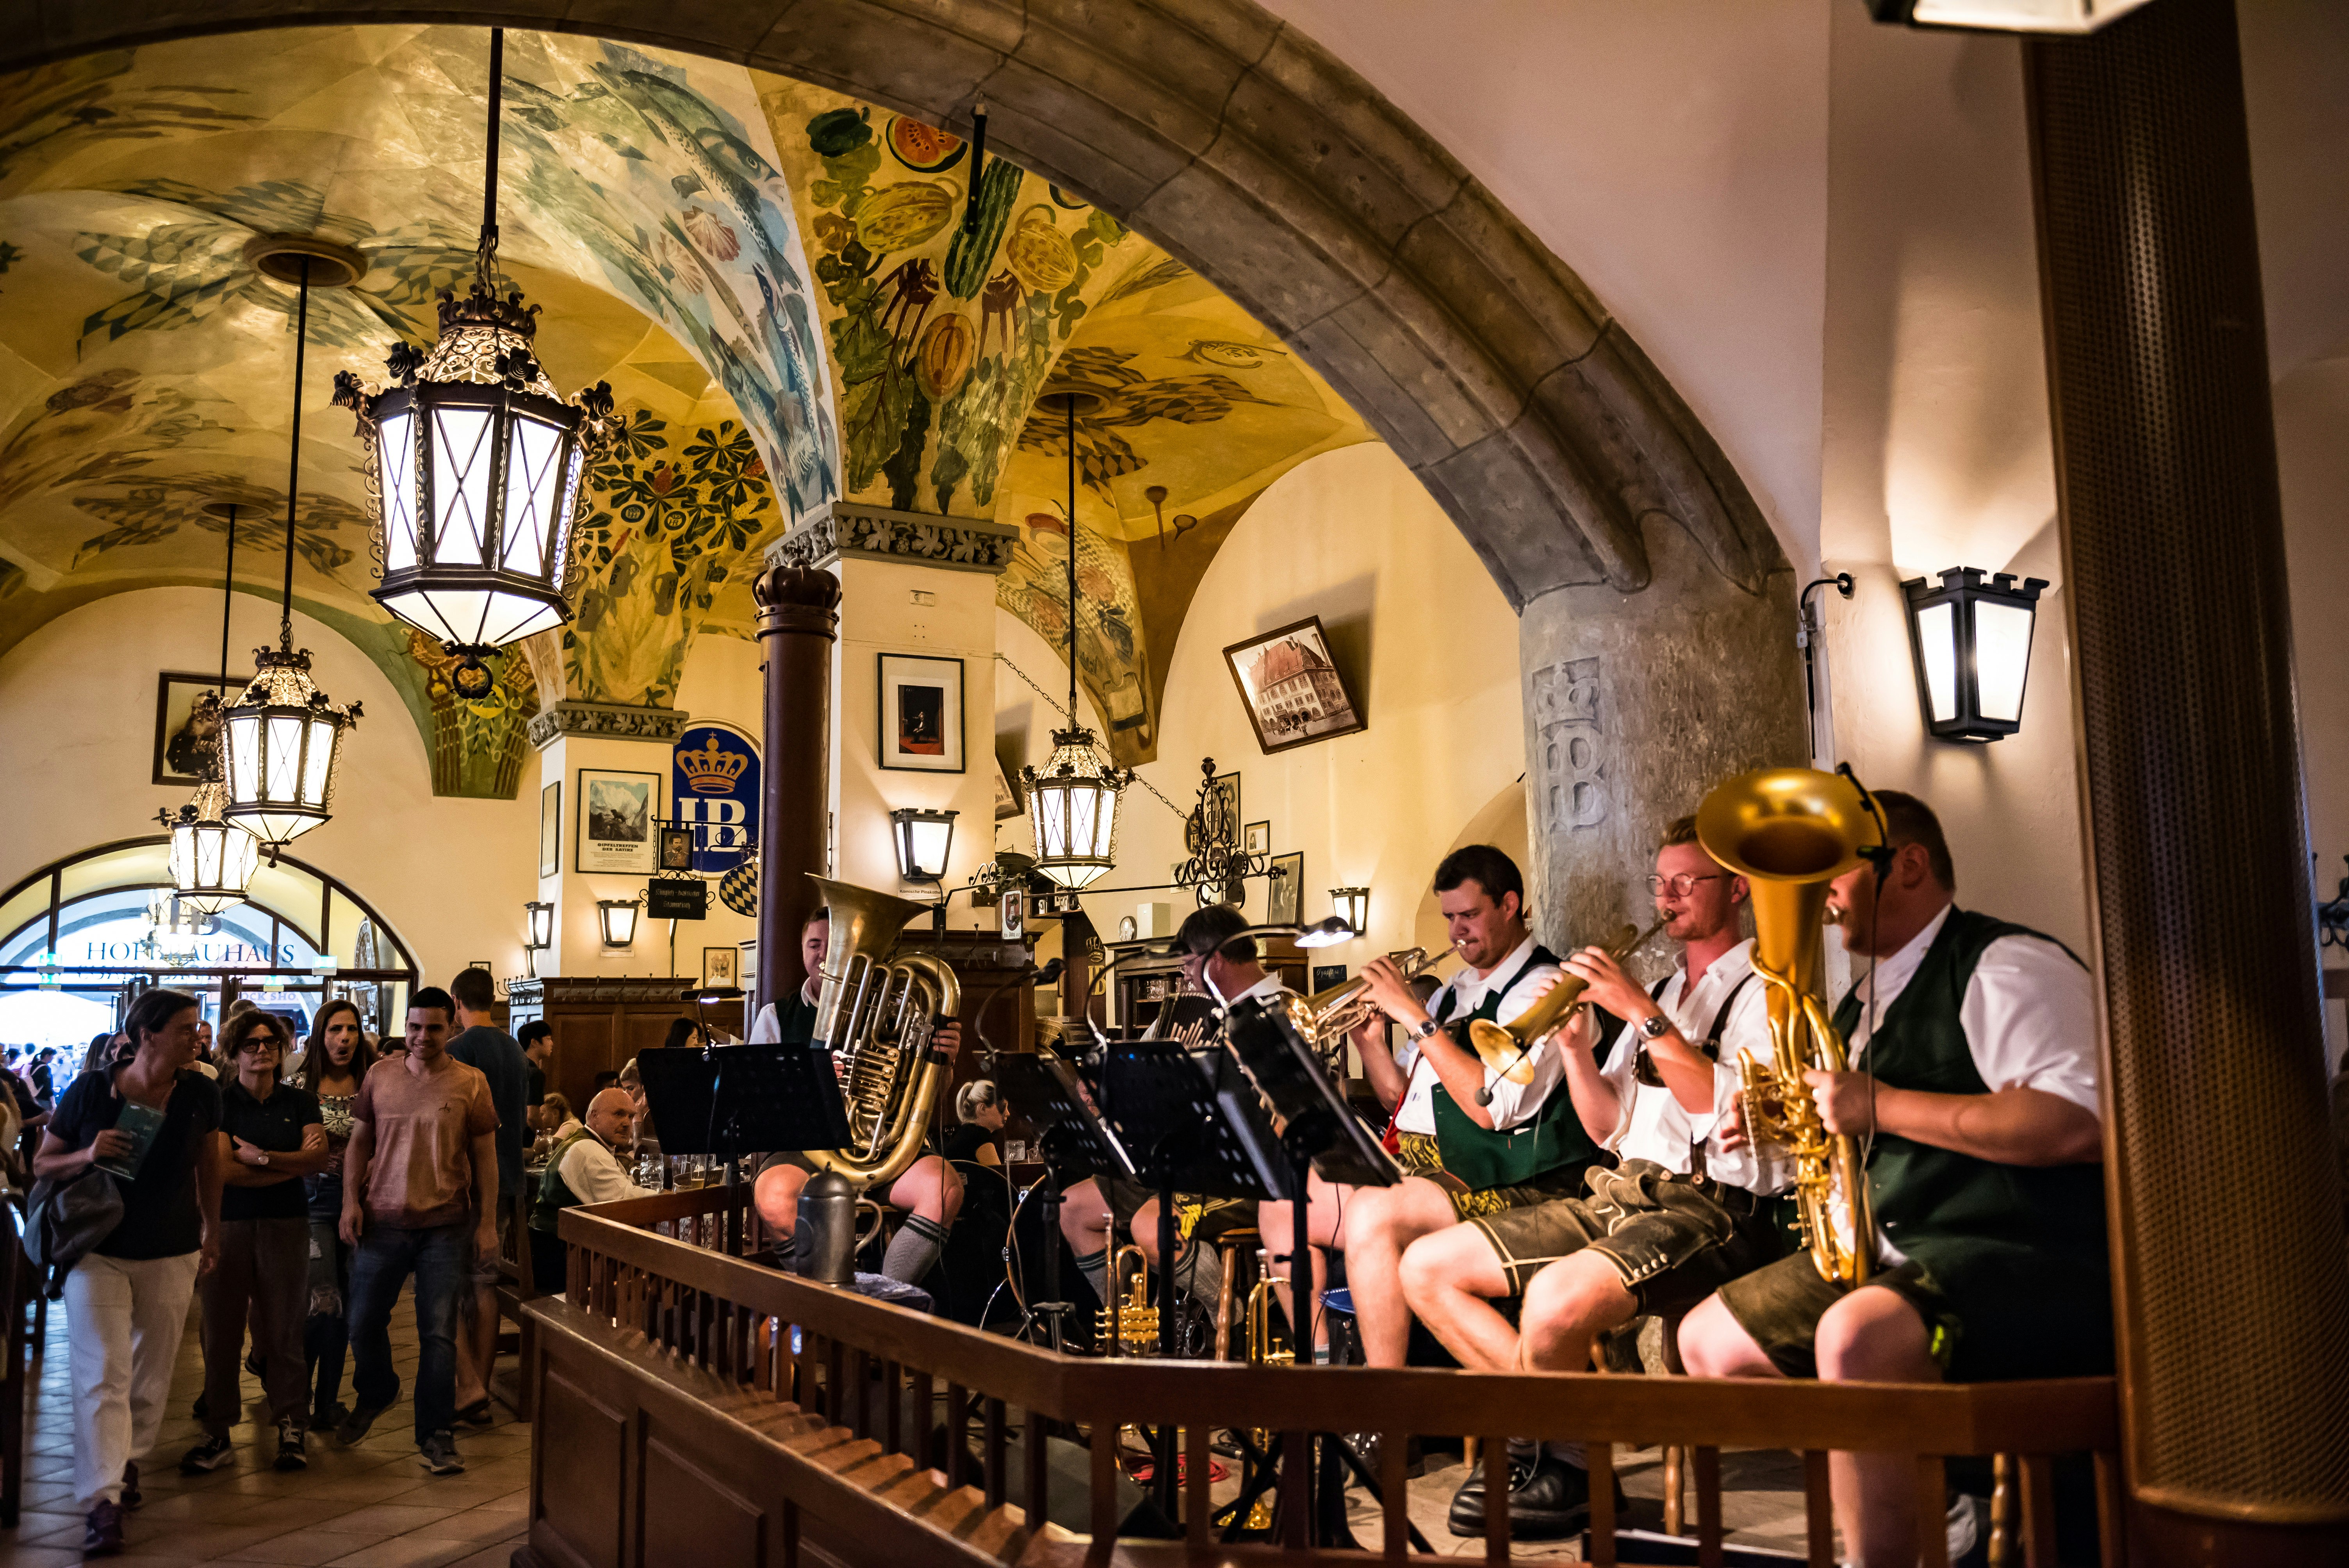 Inside Munich's famous Hofbräuhaus; the buttermilk yellow ceilings are painter with a floral design, and a group of people are watching a live brass band.